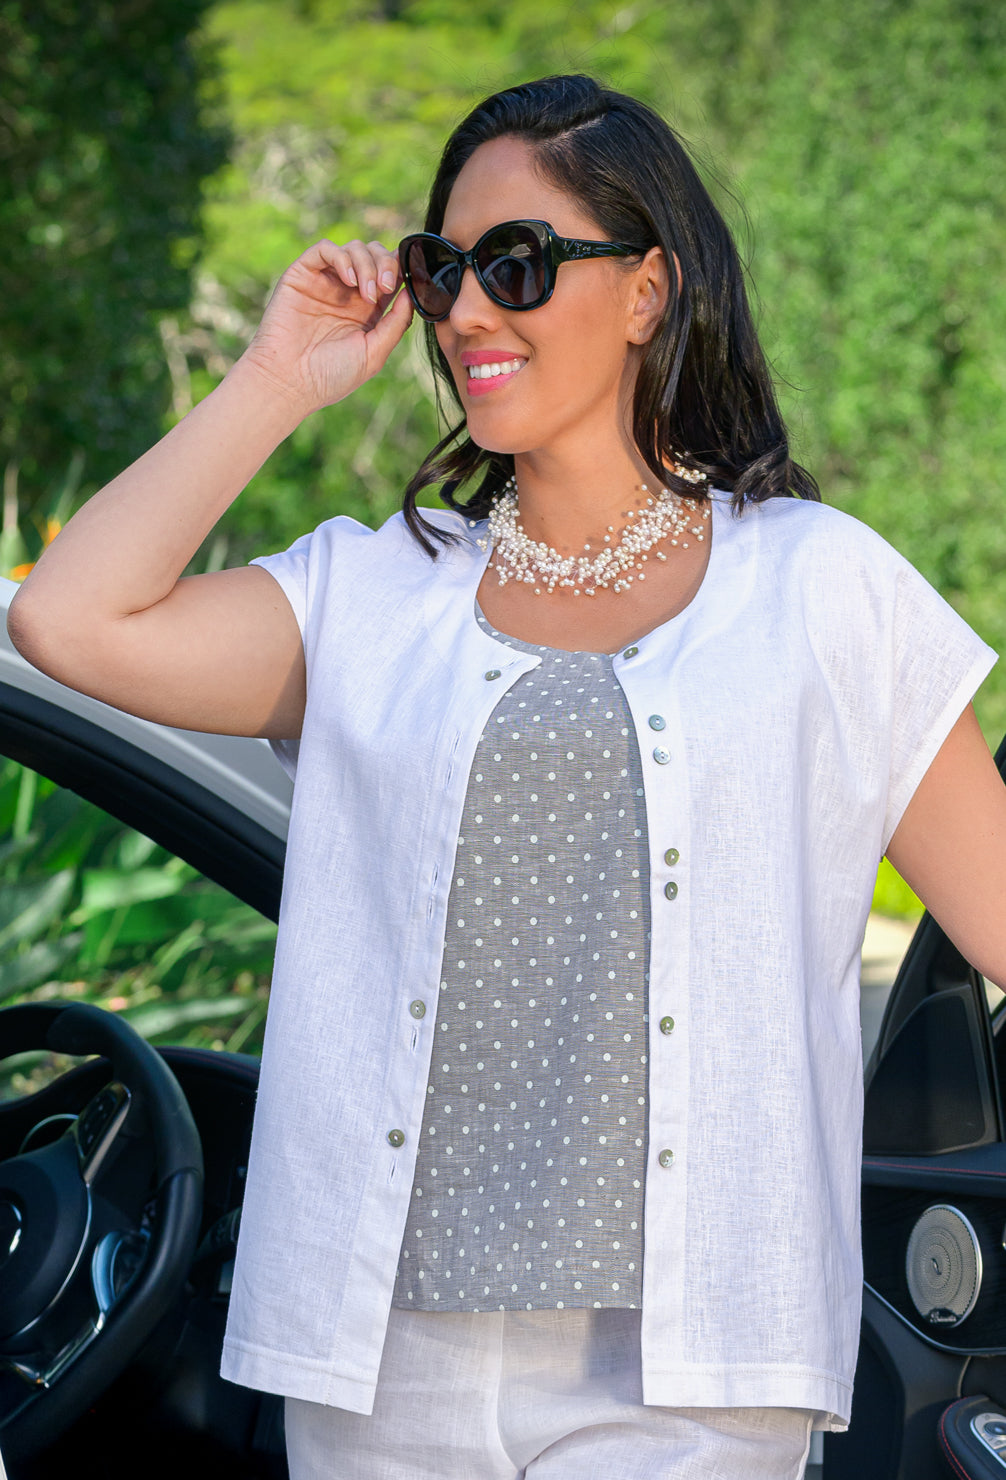 Women's Cotton & Linen Tops & Shirts. Made in Australia. Shop online for a range of timeless and classic women's cotton and linen tops, shirts, singlets, blouses, and kaftans.